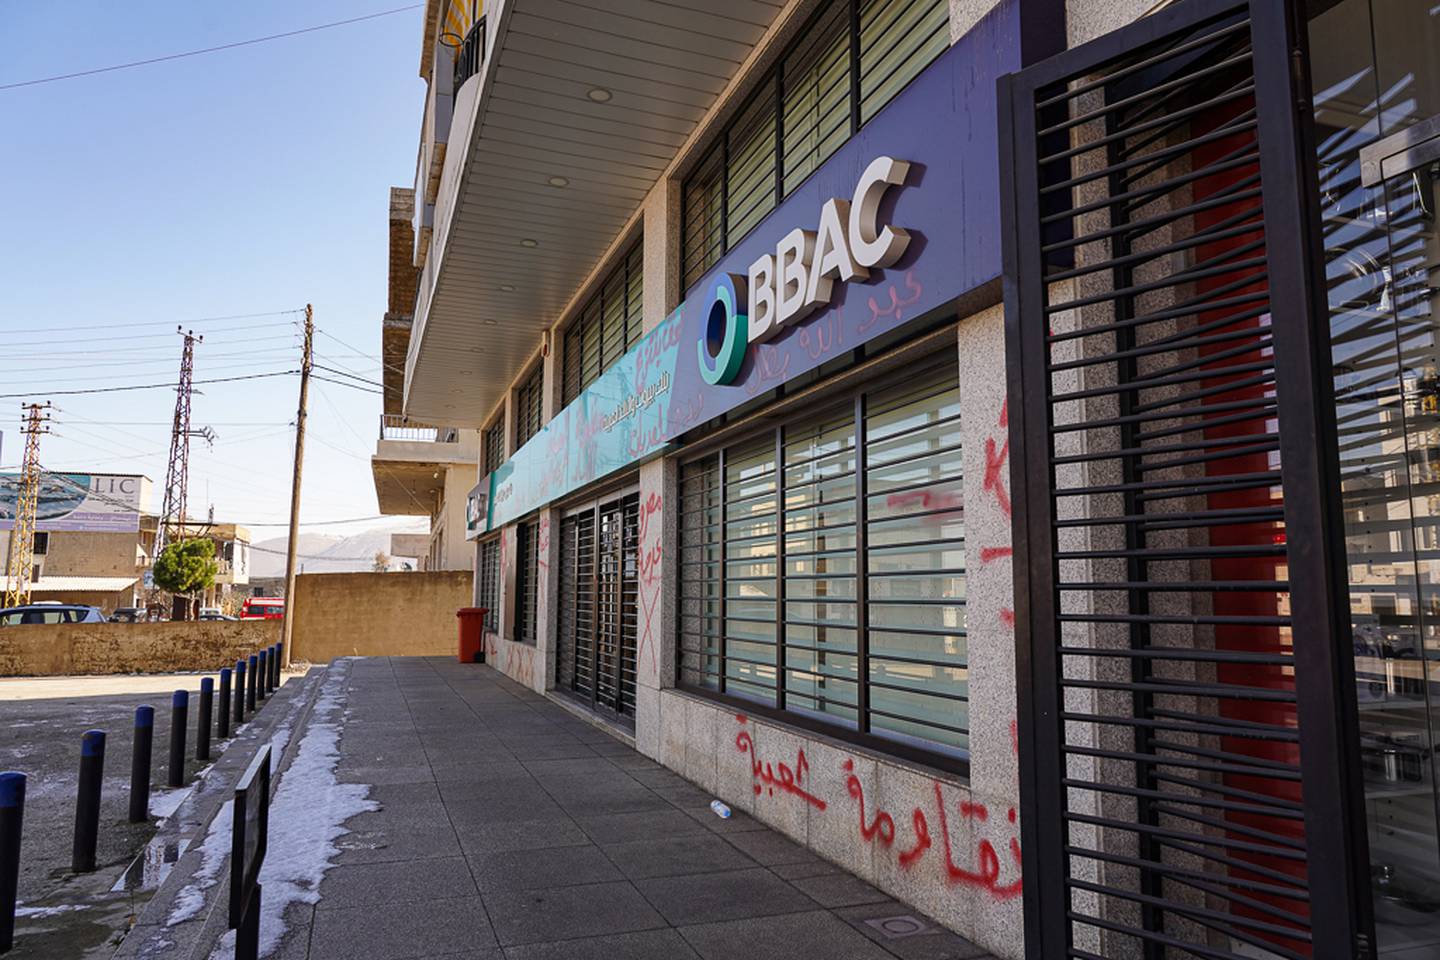 The local branch of BBAC bank in Jeb Jannine where Abdallah Assaii held staff hostage to withdraw his money. Graffiti on the walls proclaims support for Mr Assaii. Finbar Anderson/ The National